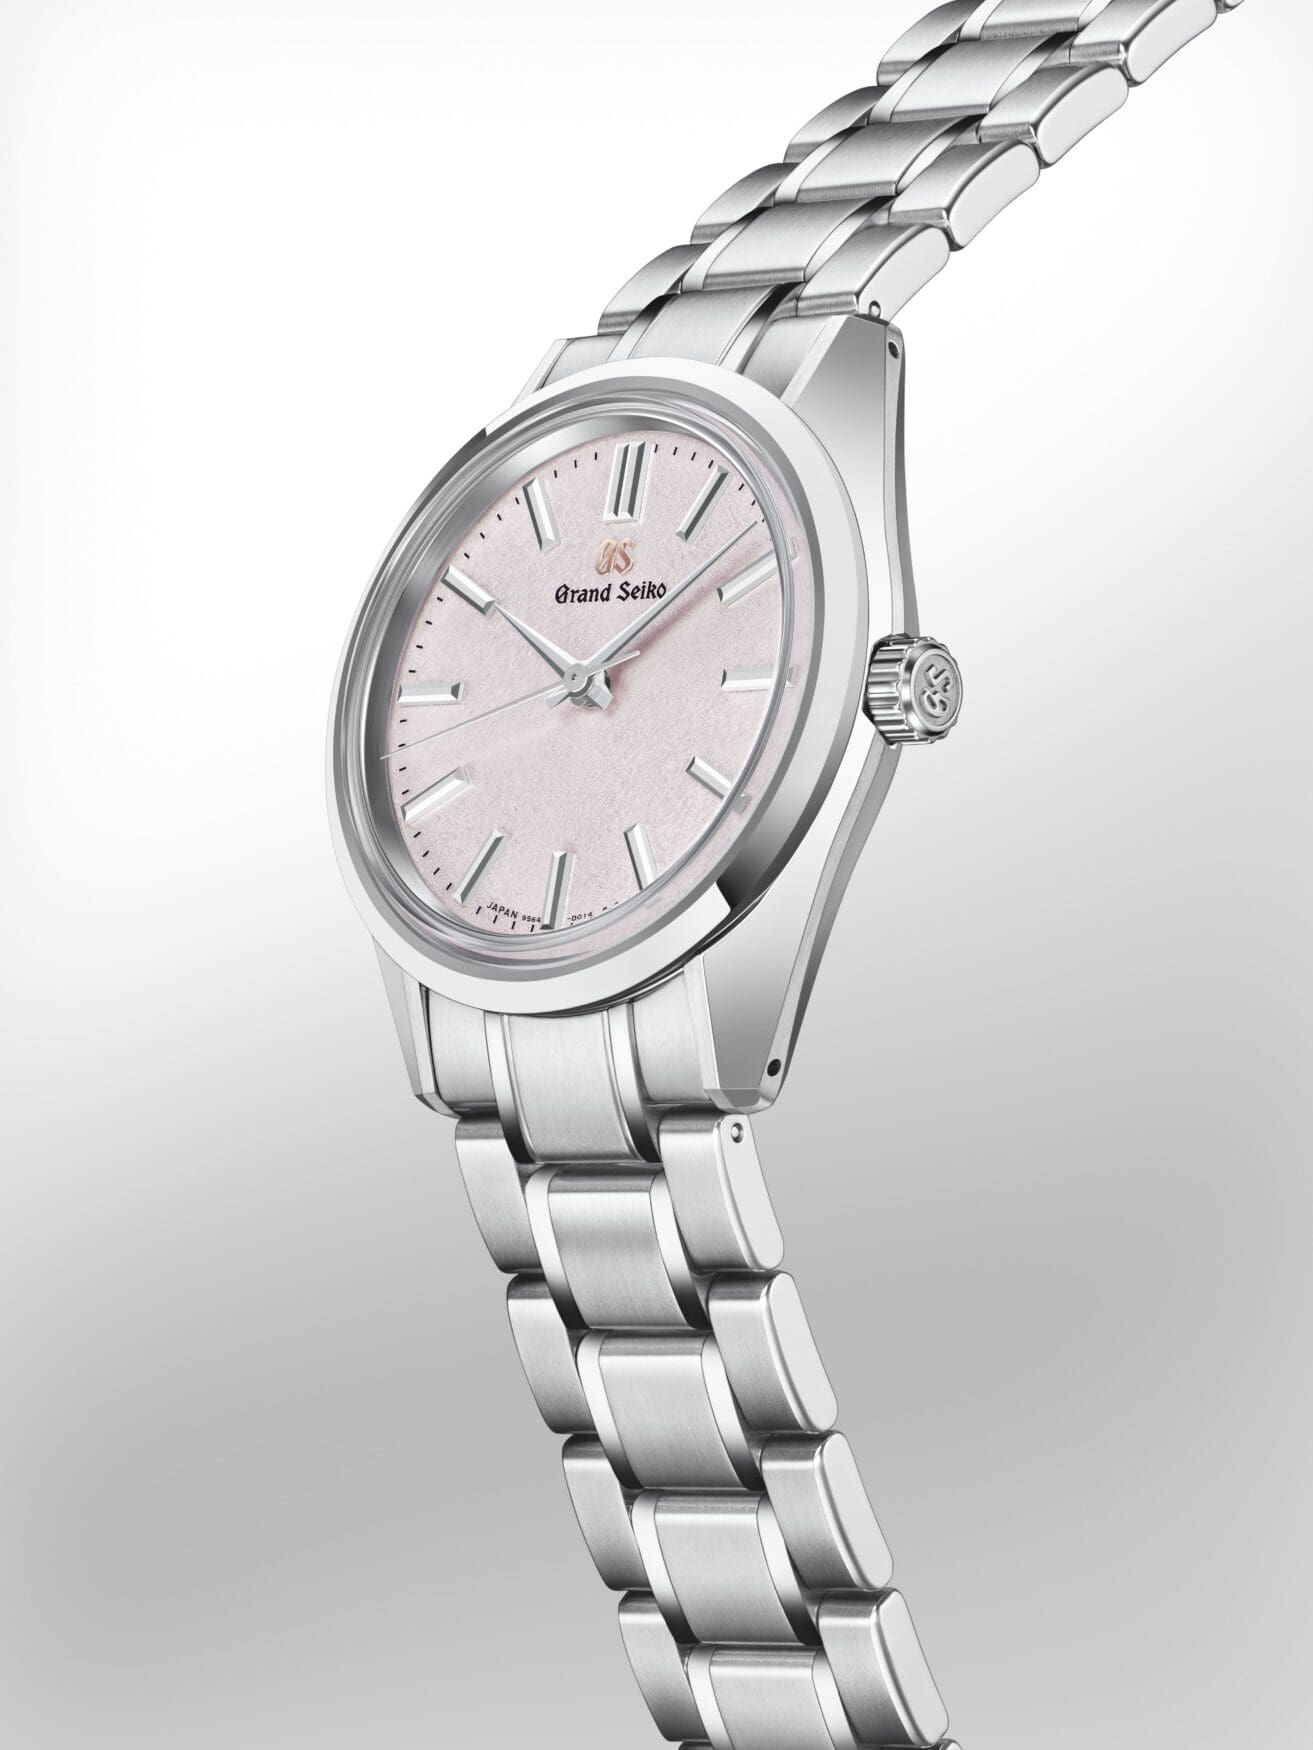 INTRODUCING: The Grand Seiko SBGW289 Limited Edition